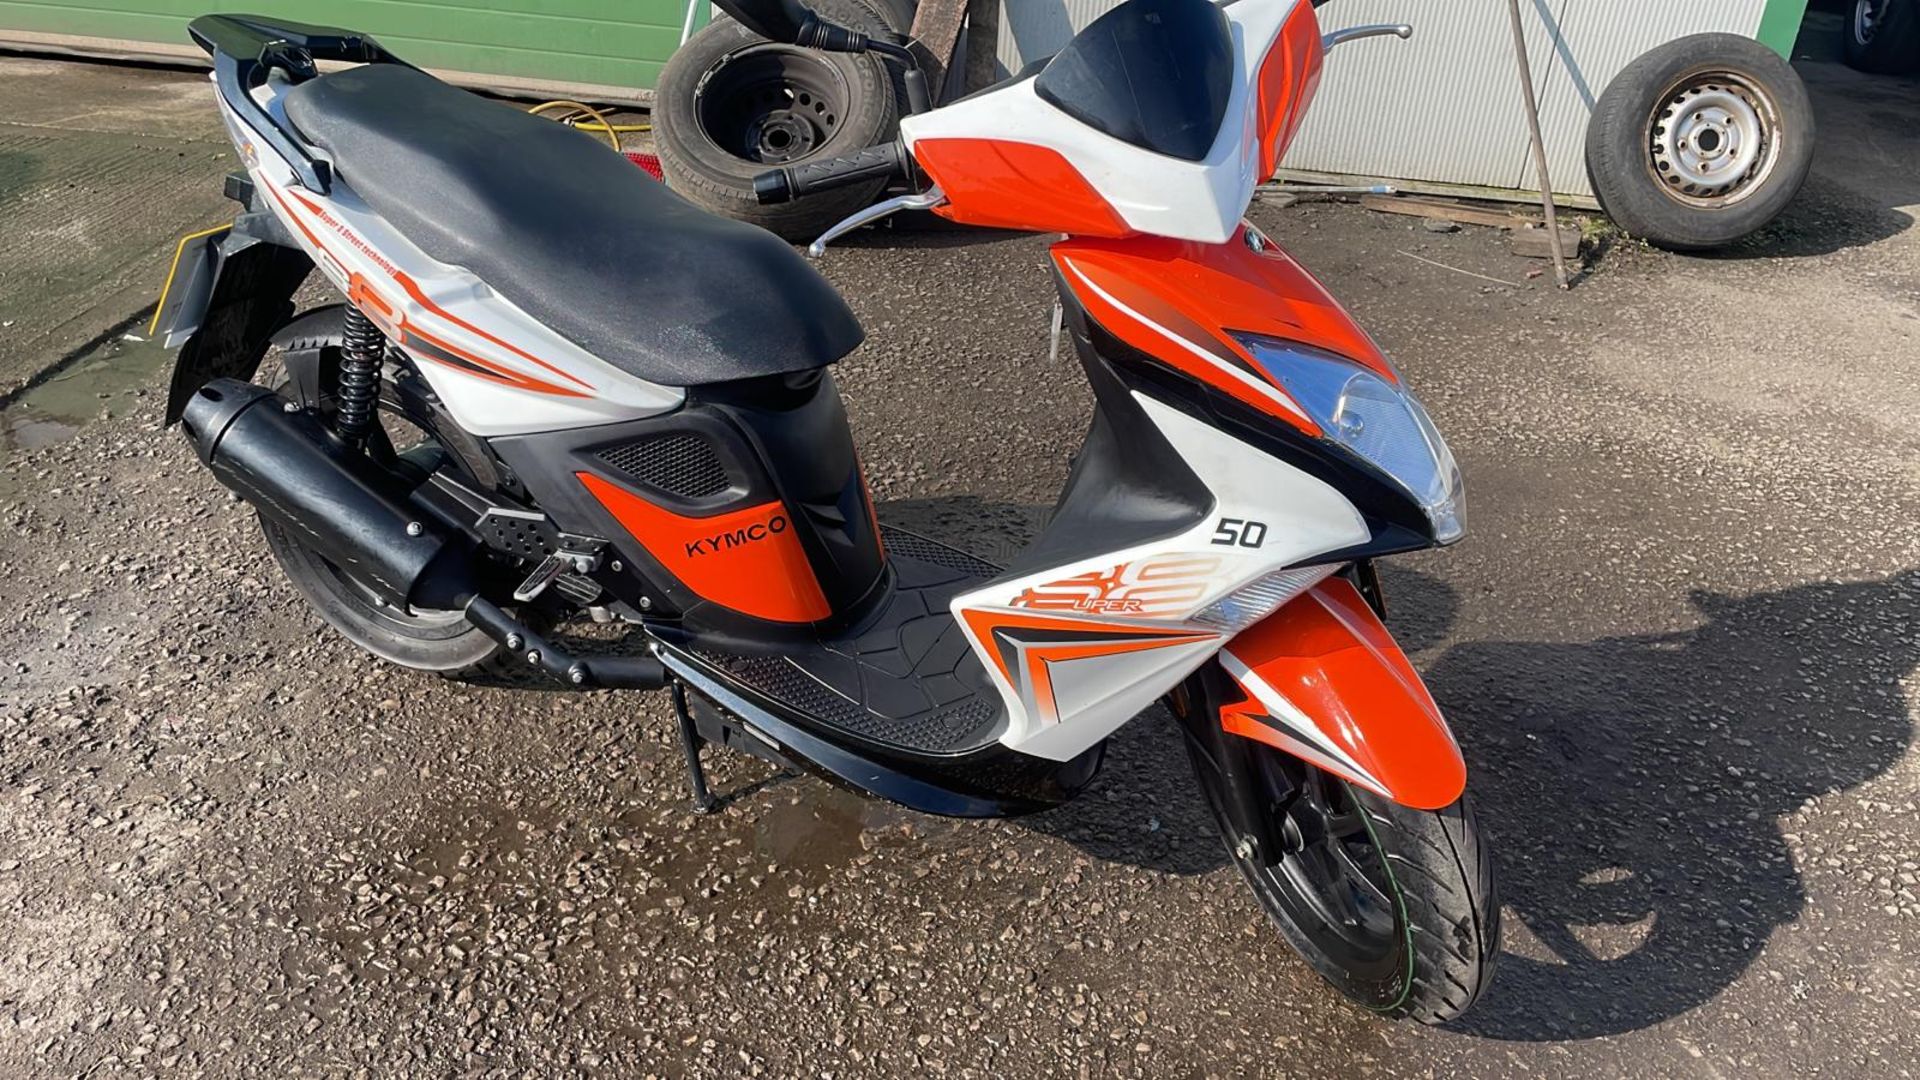 2020 71 KYMCO SUPER 8 50 SCOOTER - ONLY 291 WARRANTED MILES FROM NEW